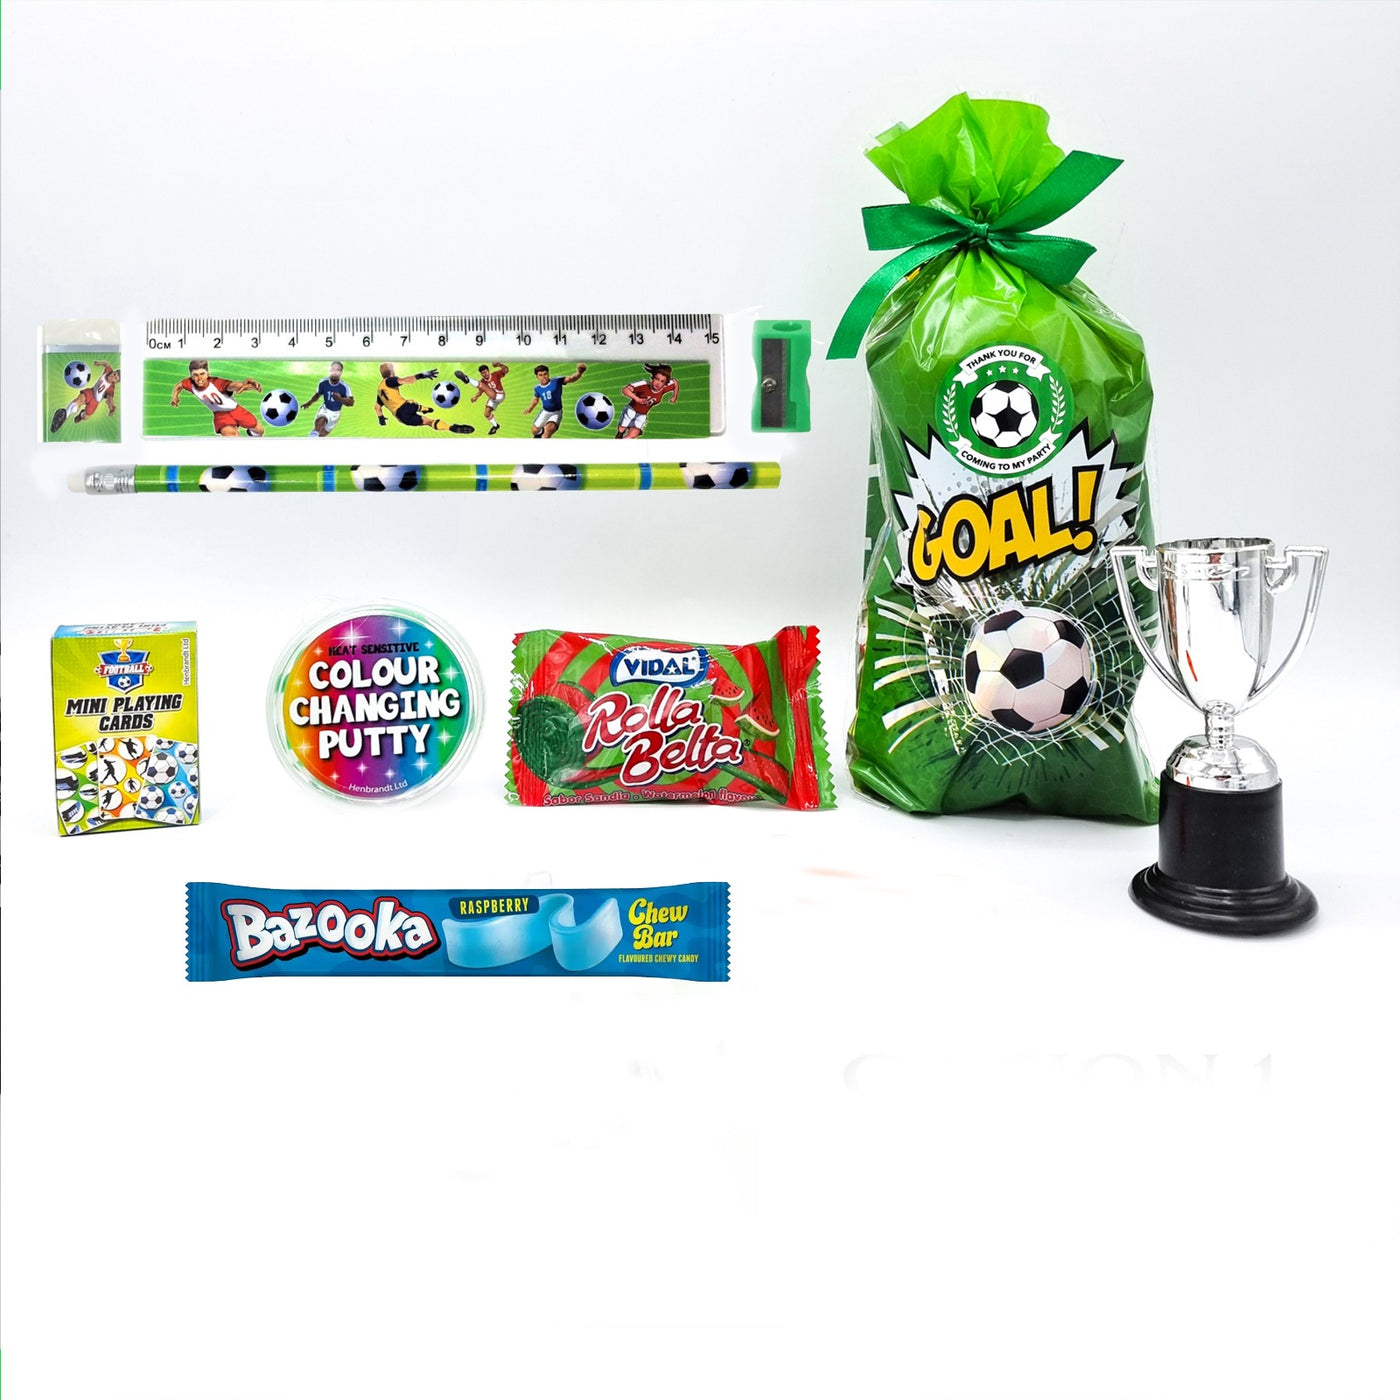 Pre-filled Children's Football Birthday Party Bags For Boys And Girls.